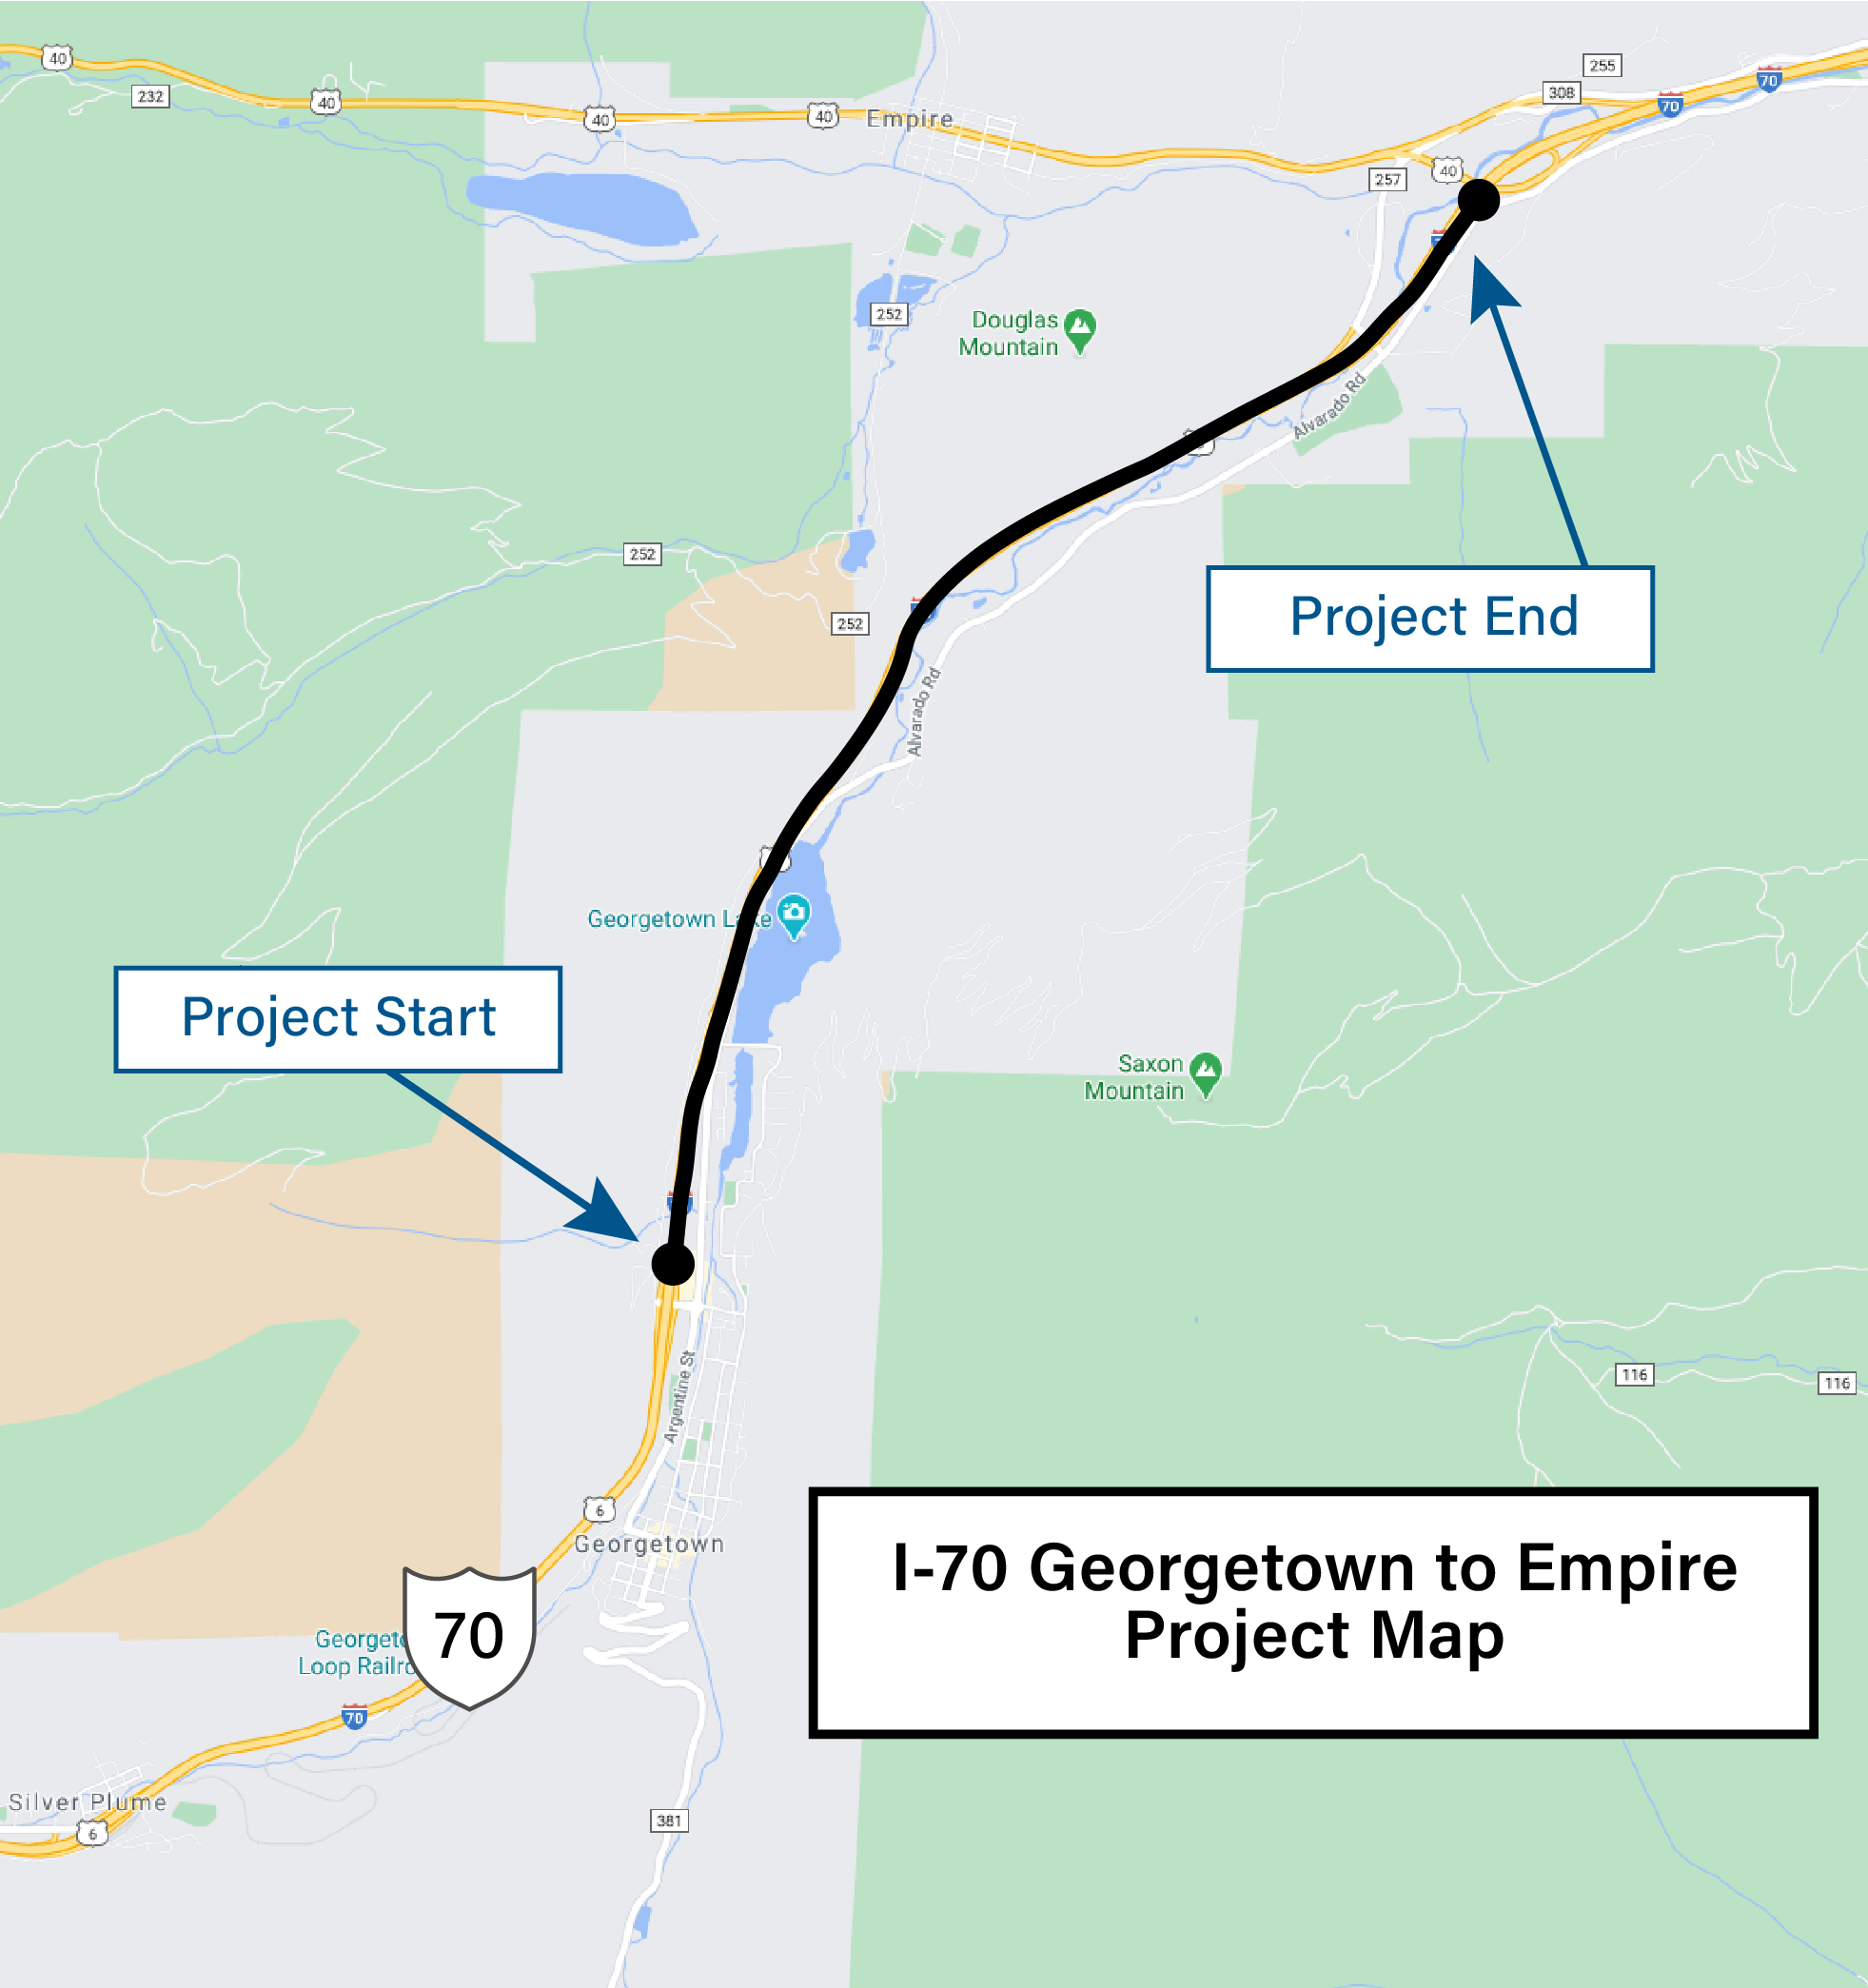 I-70 Georgetown to Empire Project Map_Edits_04.png detail image